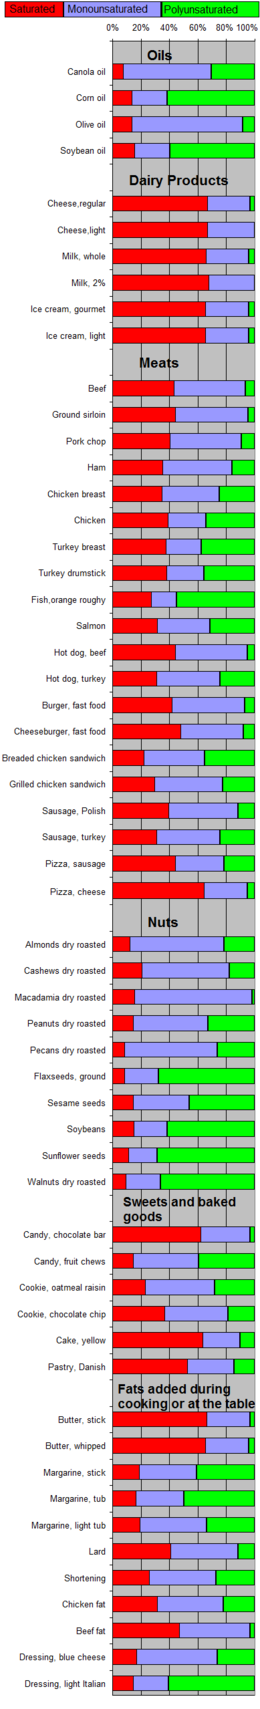 Fat composition in foods.png